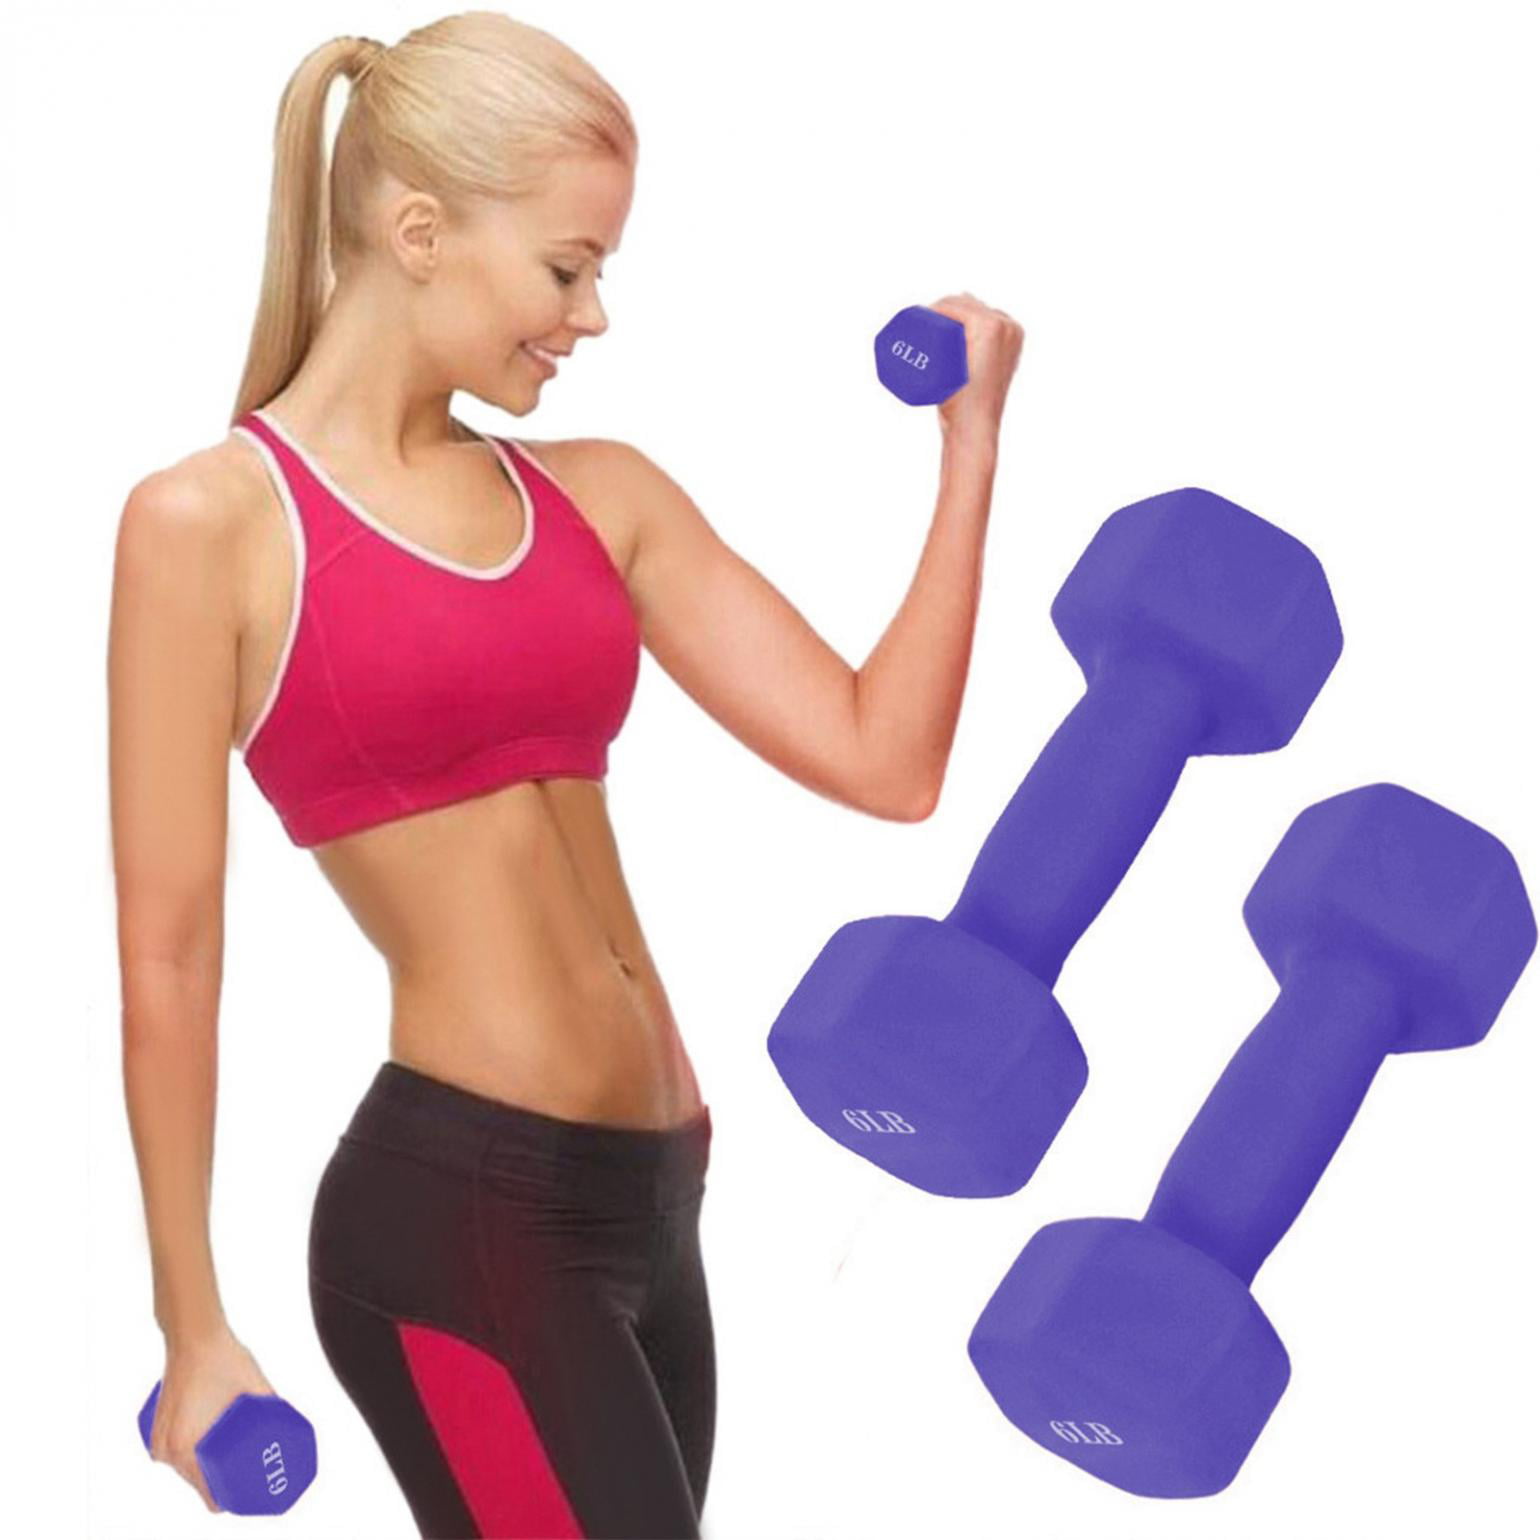 Fitness Walking Dumbbells Hand Weights 3lb Pair Swing Weights 